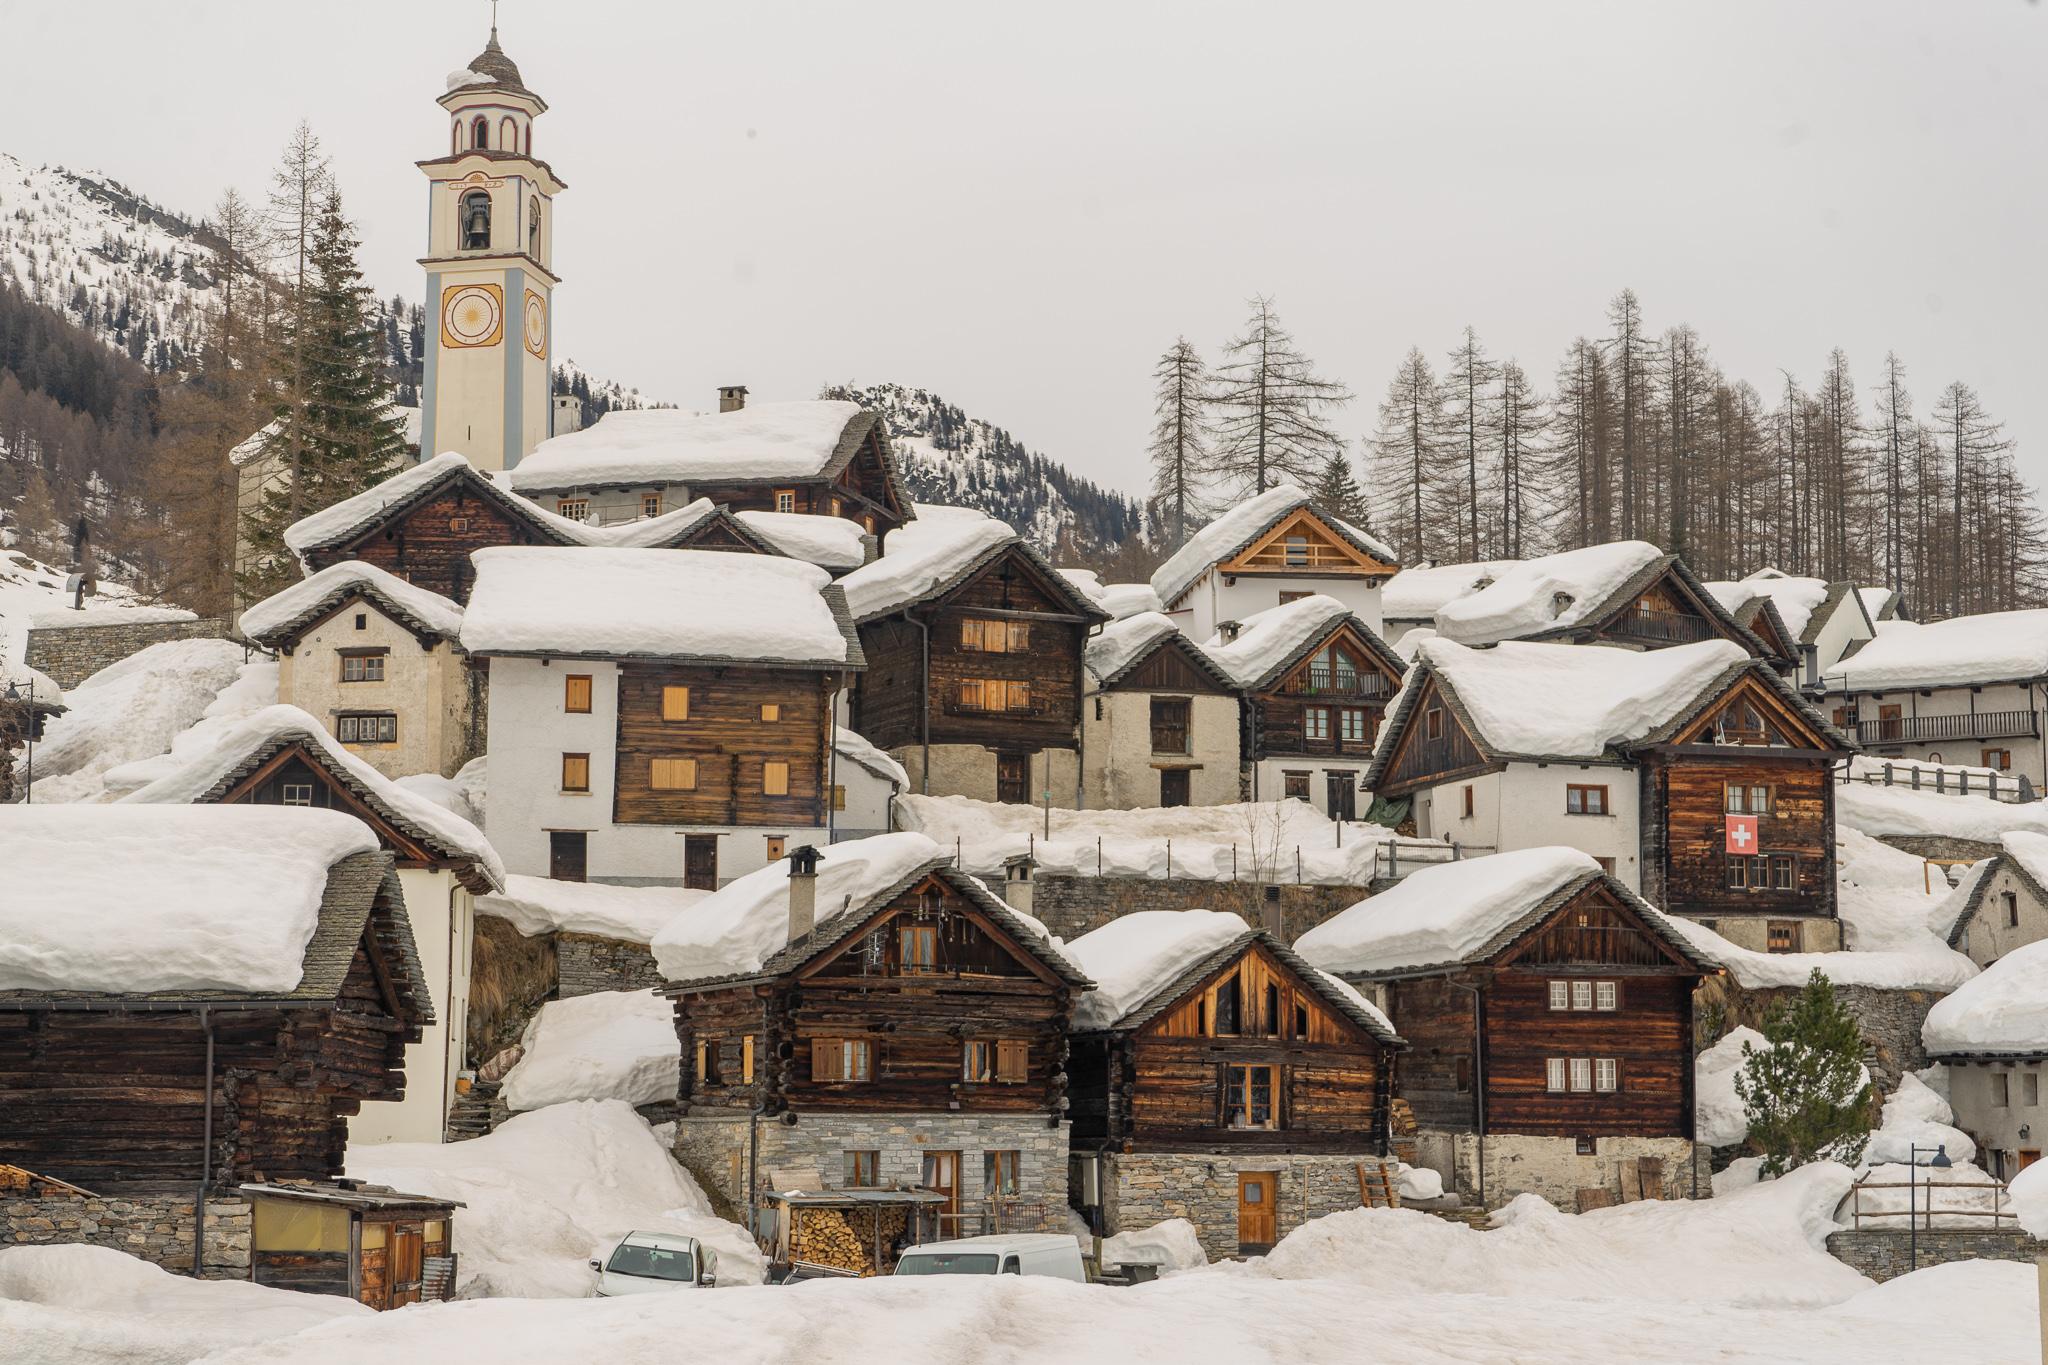 Bosco Gurin village with a lot of snow on all the wooden houses roofs and one tall church clock tower